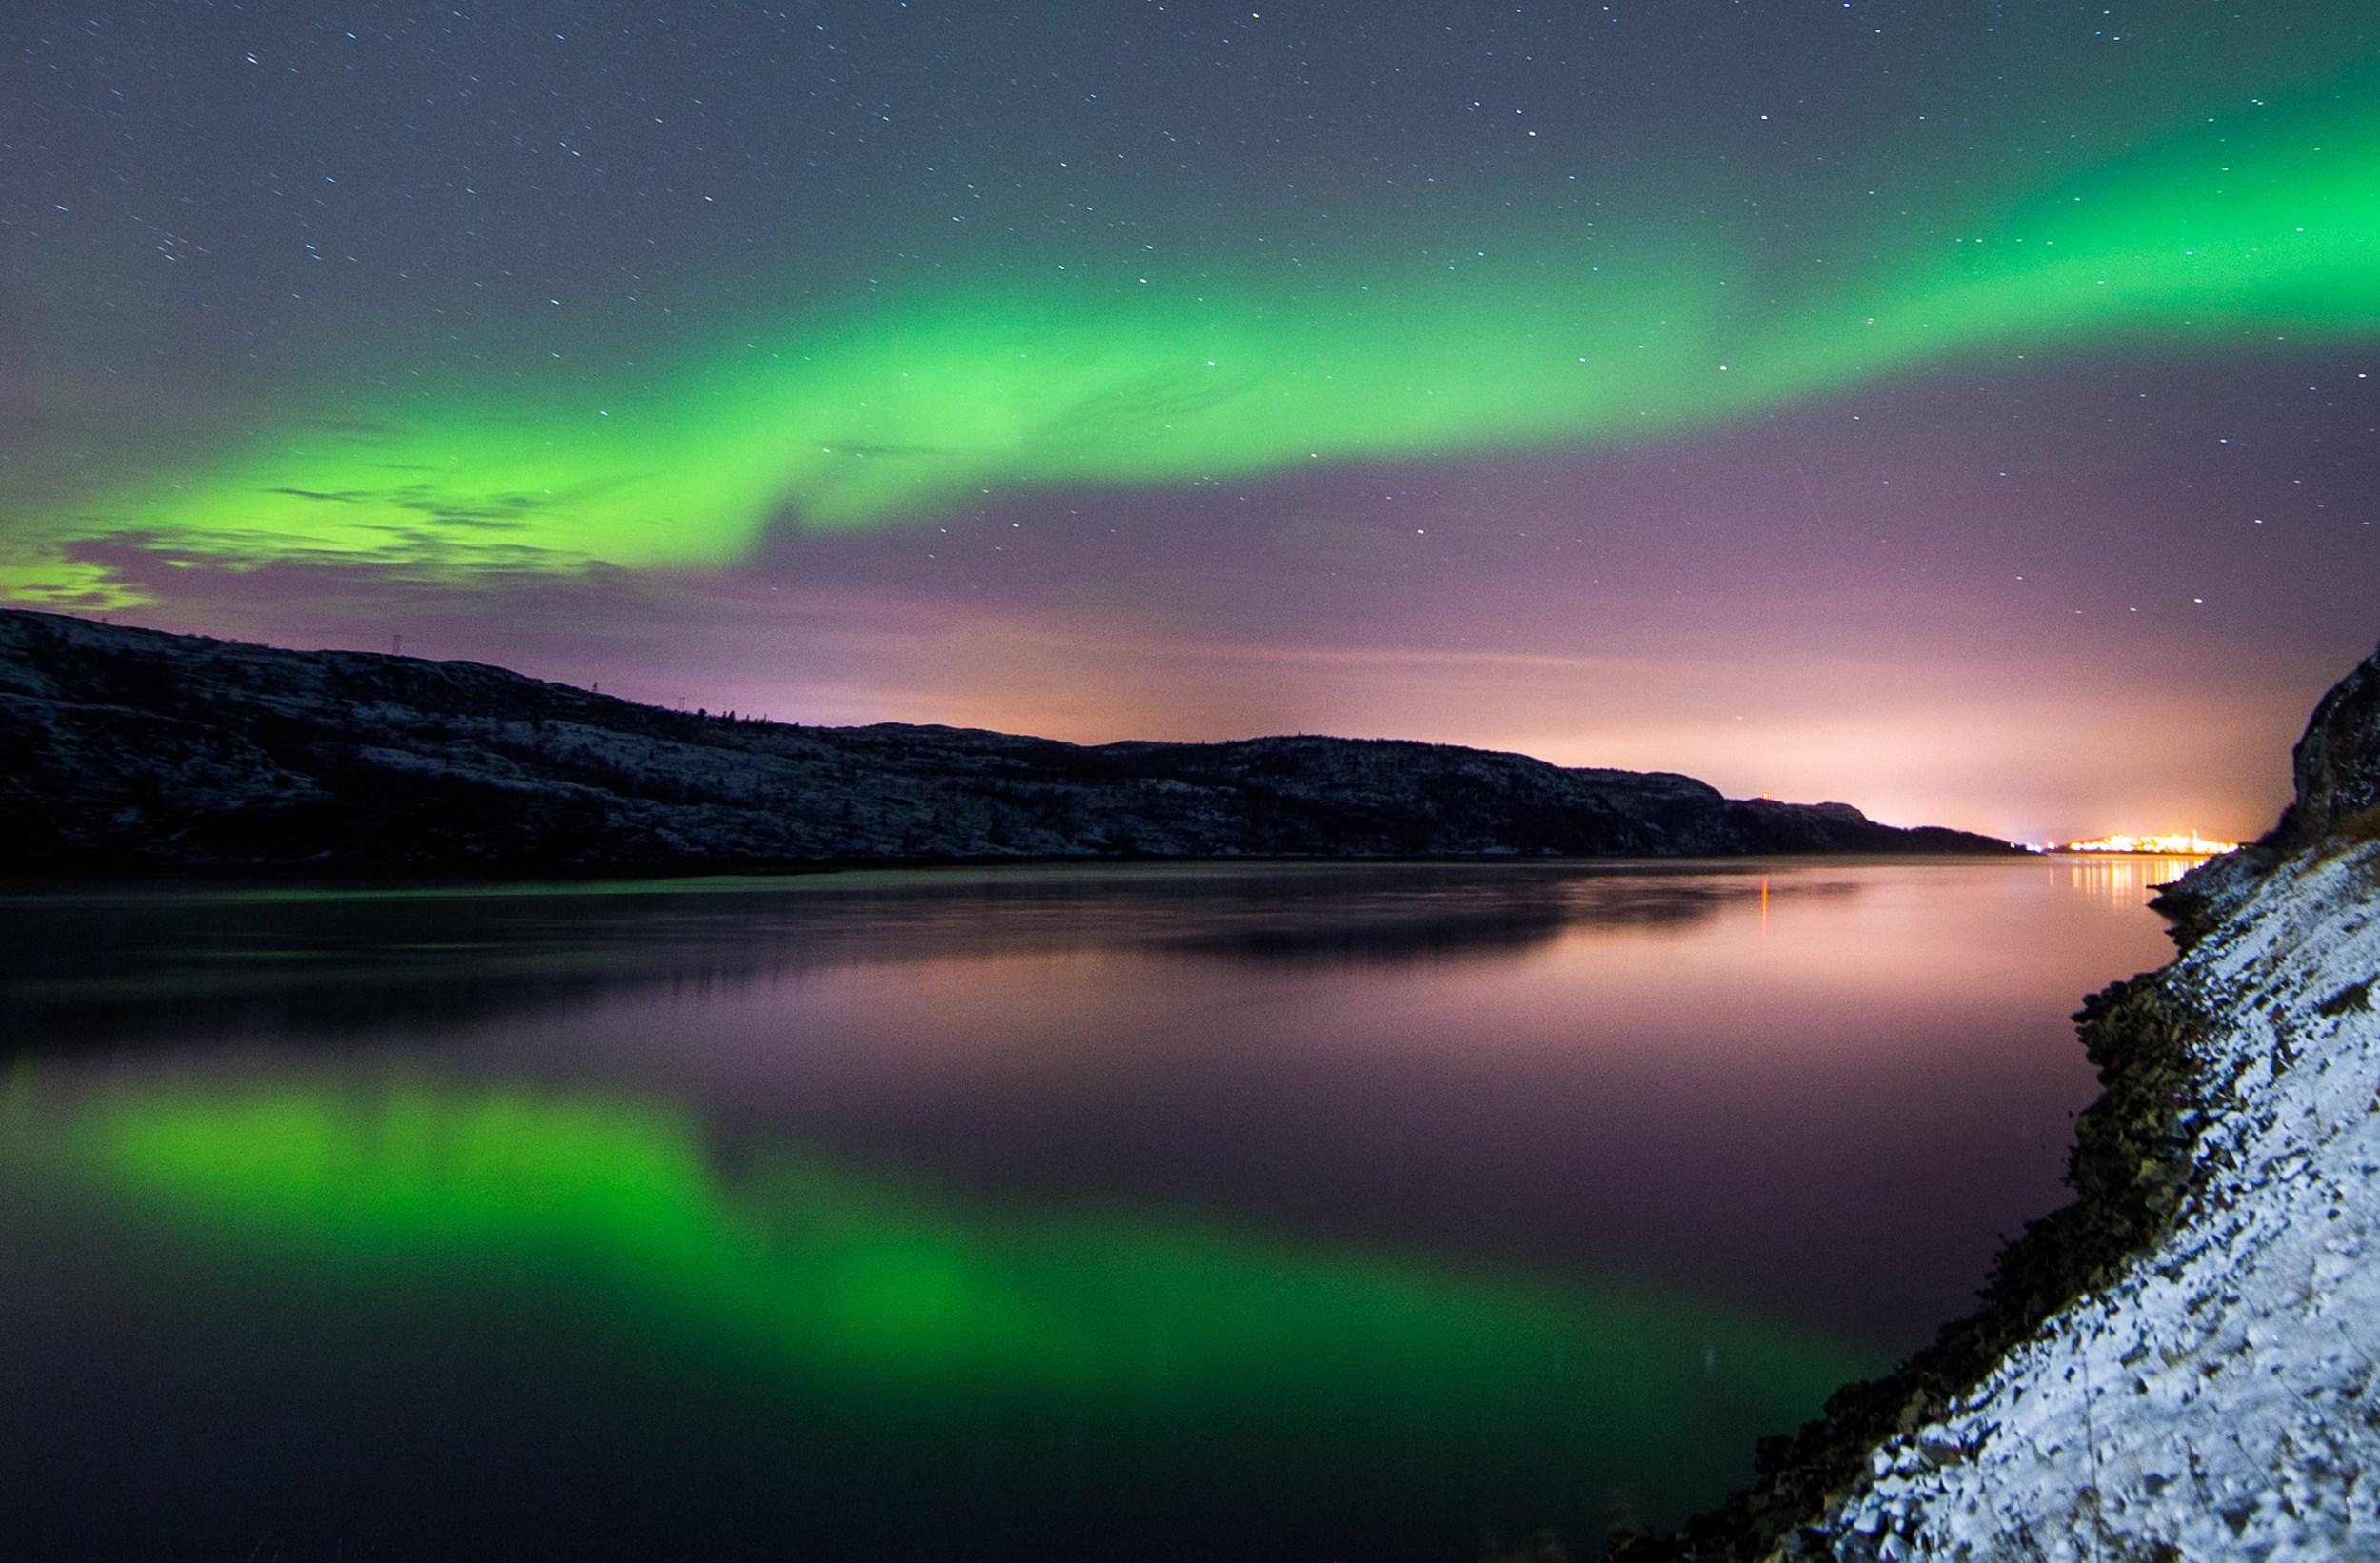 Northern Lights display may be visible in Scotland tonight, forecasters say